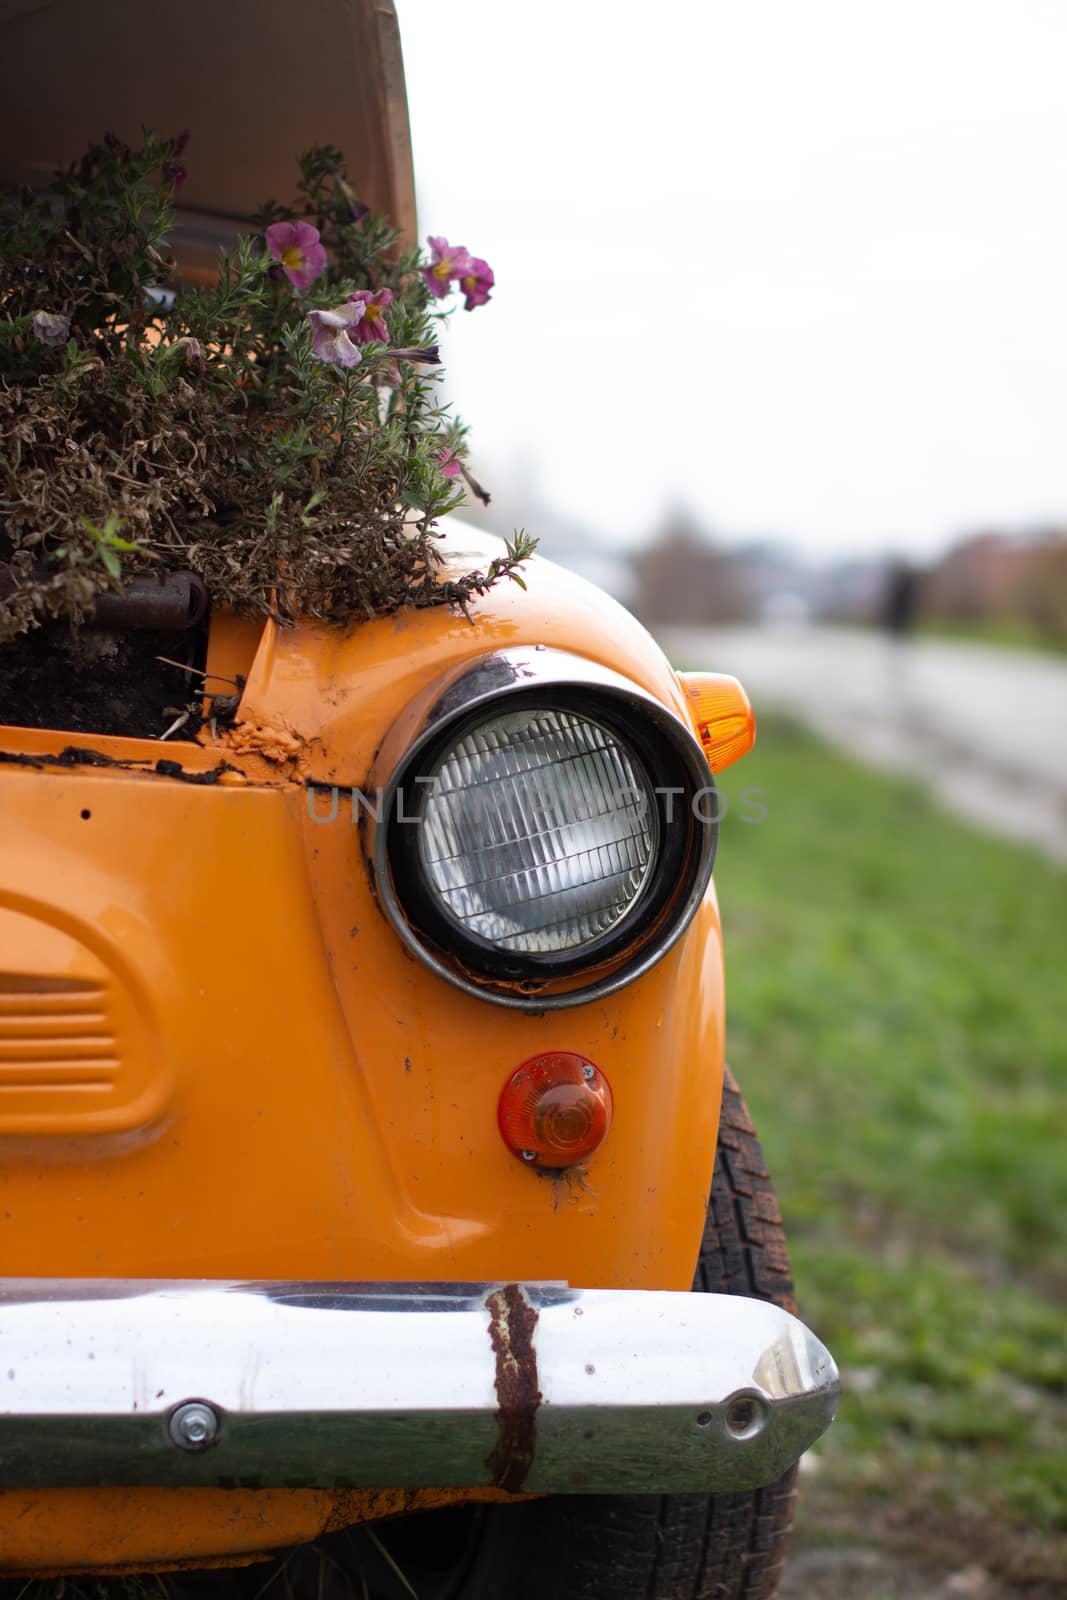 An old yellow car with round headlights and an open hood like a flower bed stands outside a flower shop in the city. Round headlight close-up